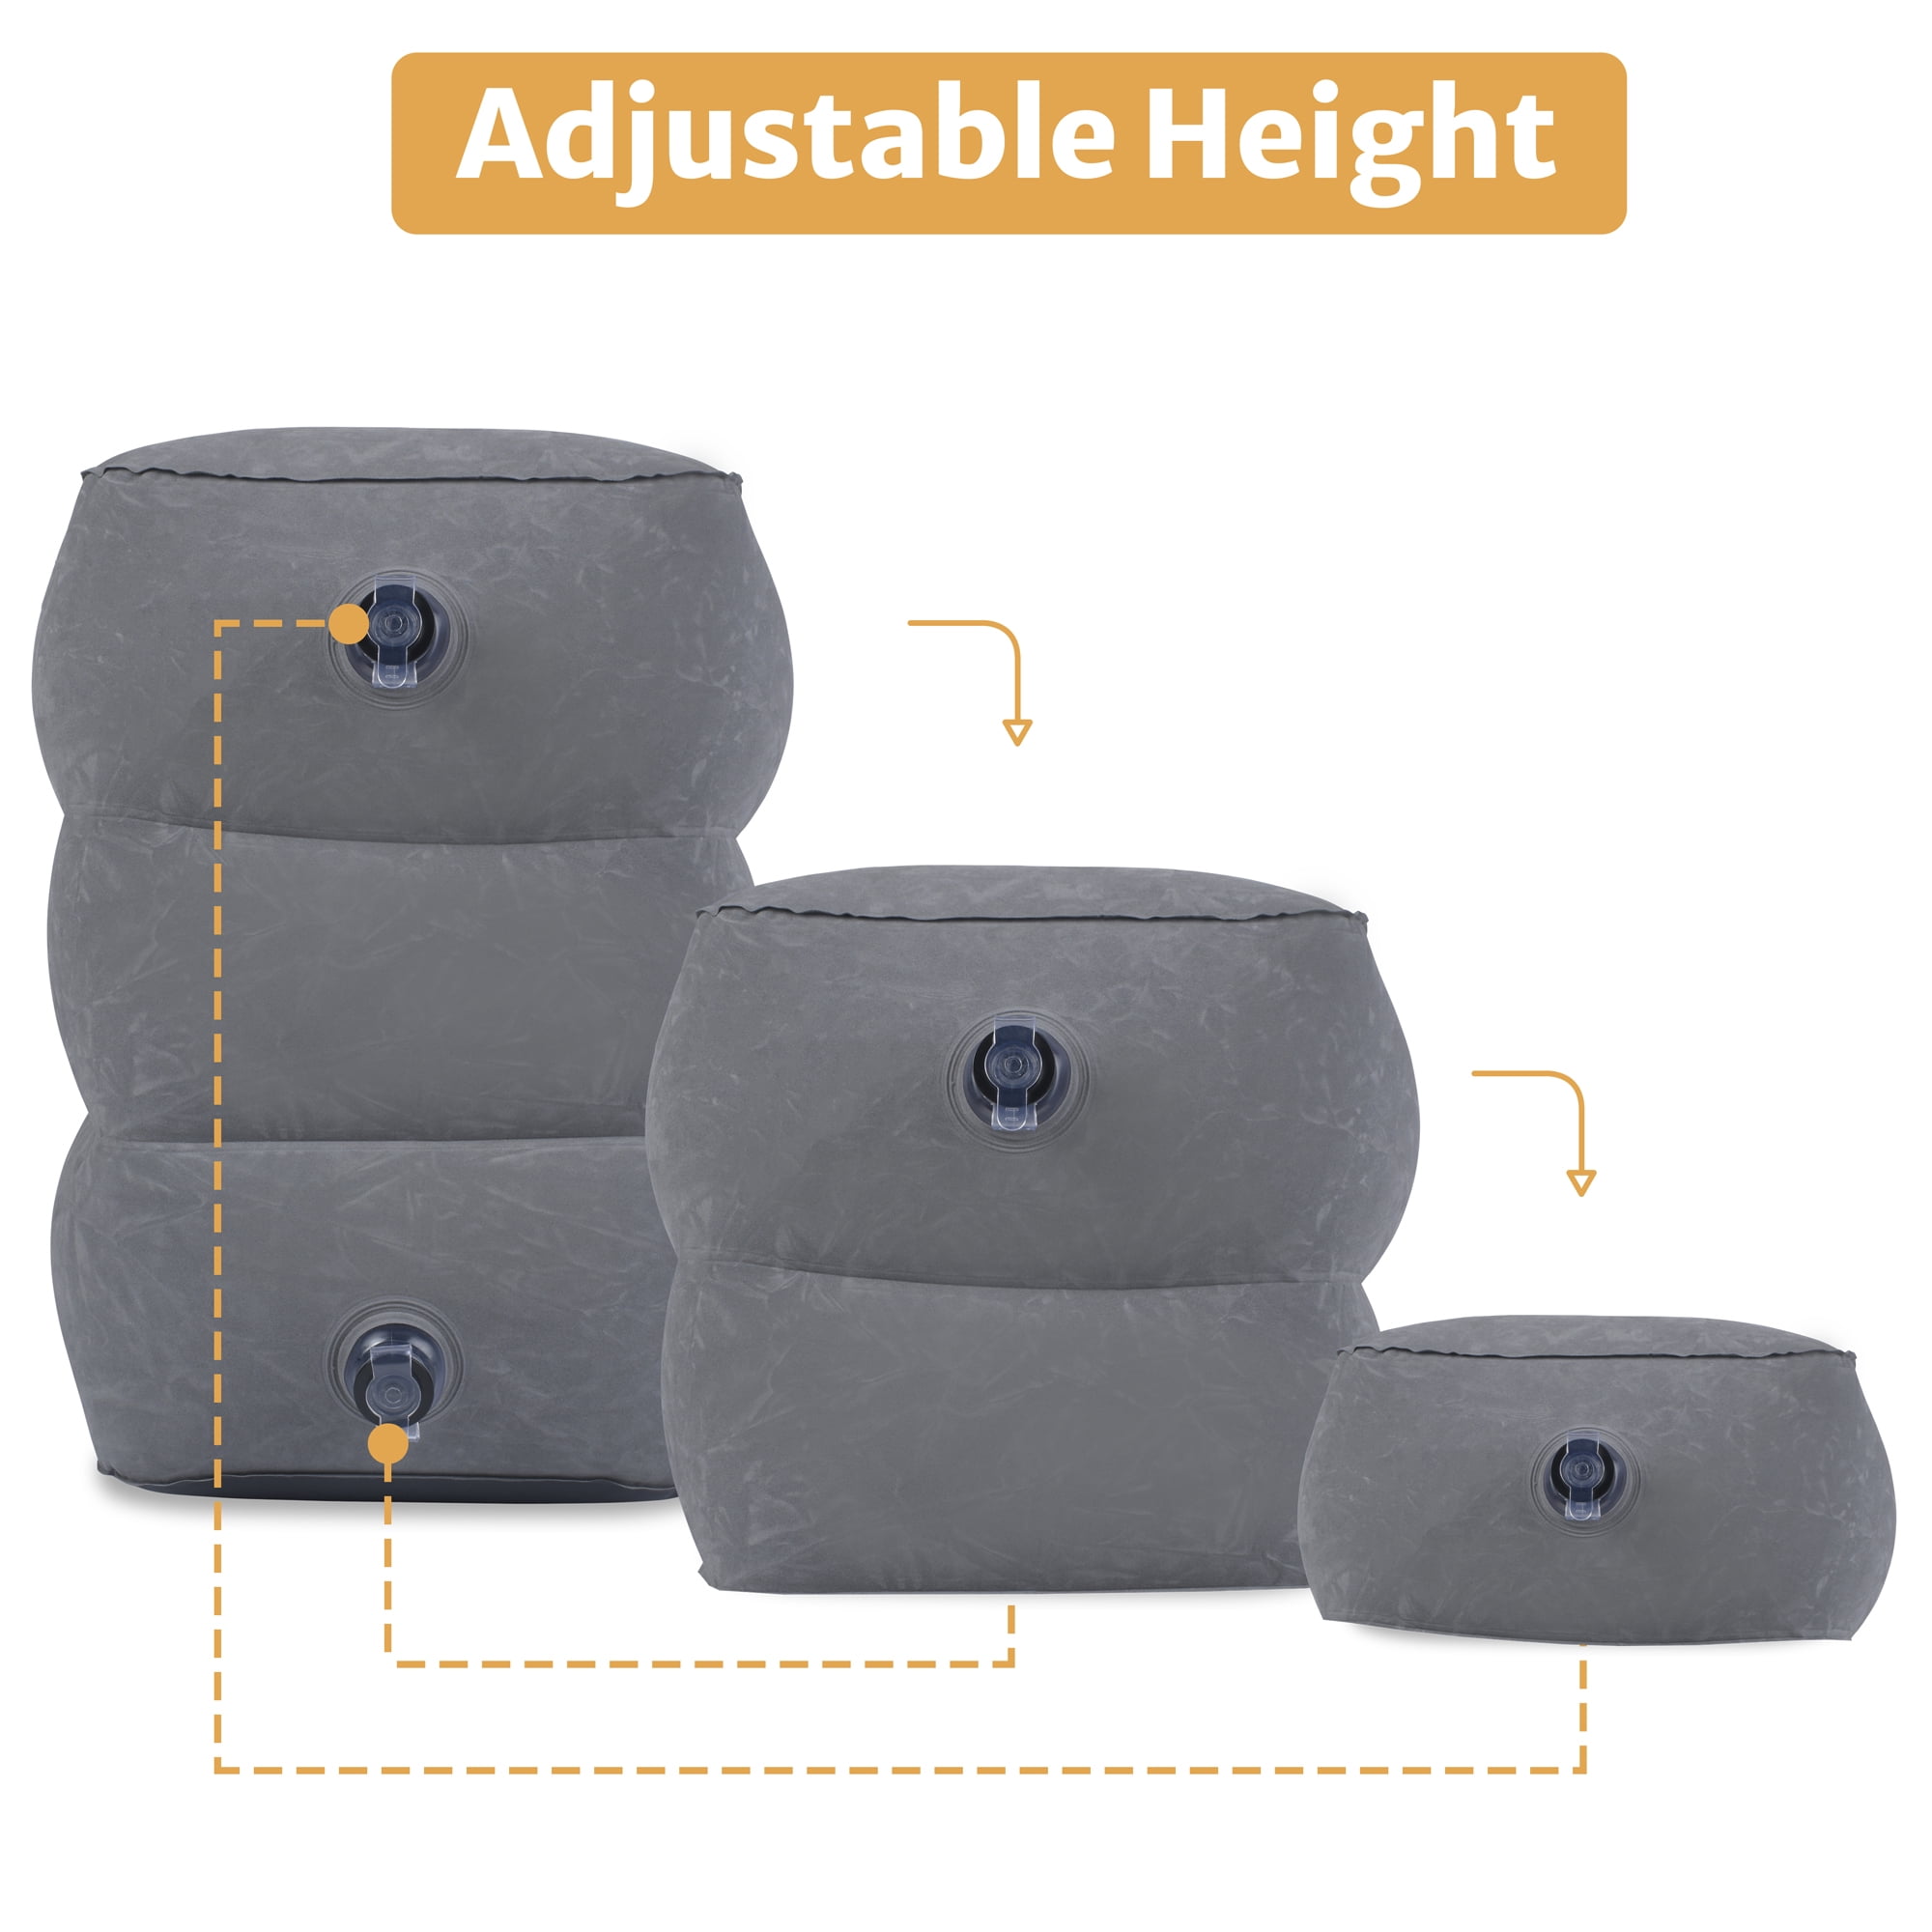 JefDiee Inflatable Travel Foot Rest Pillow, Kids Airplane Bed, Adjustable 3  Layers Height Leg Rest Pillow, Adults Travel Essentials Great for Airplane,  Office, Home, Trains, Cars (2 Pack) Grey-2pack